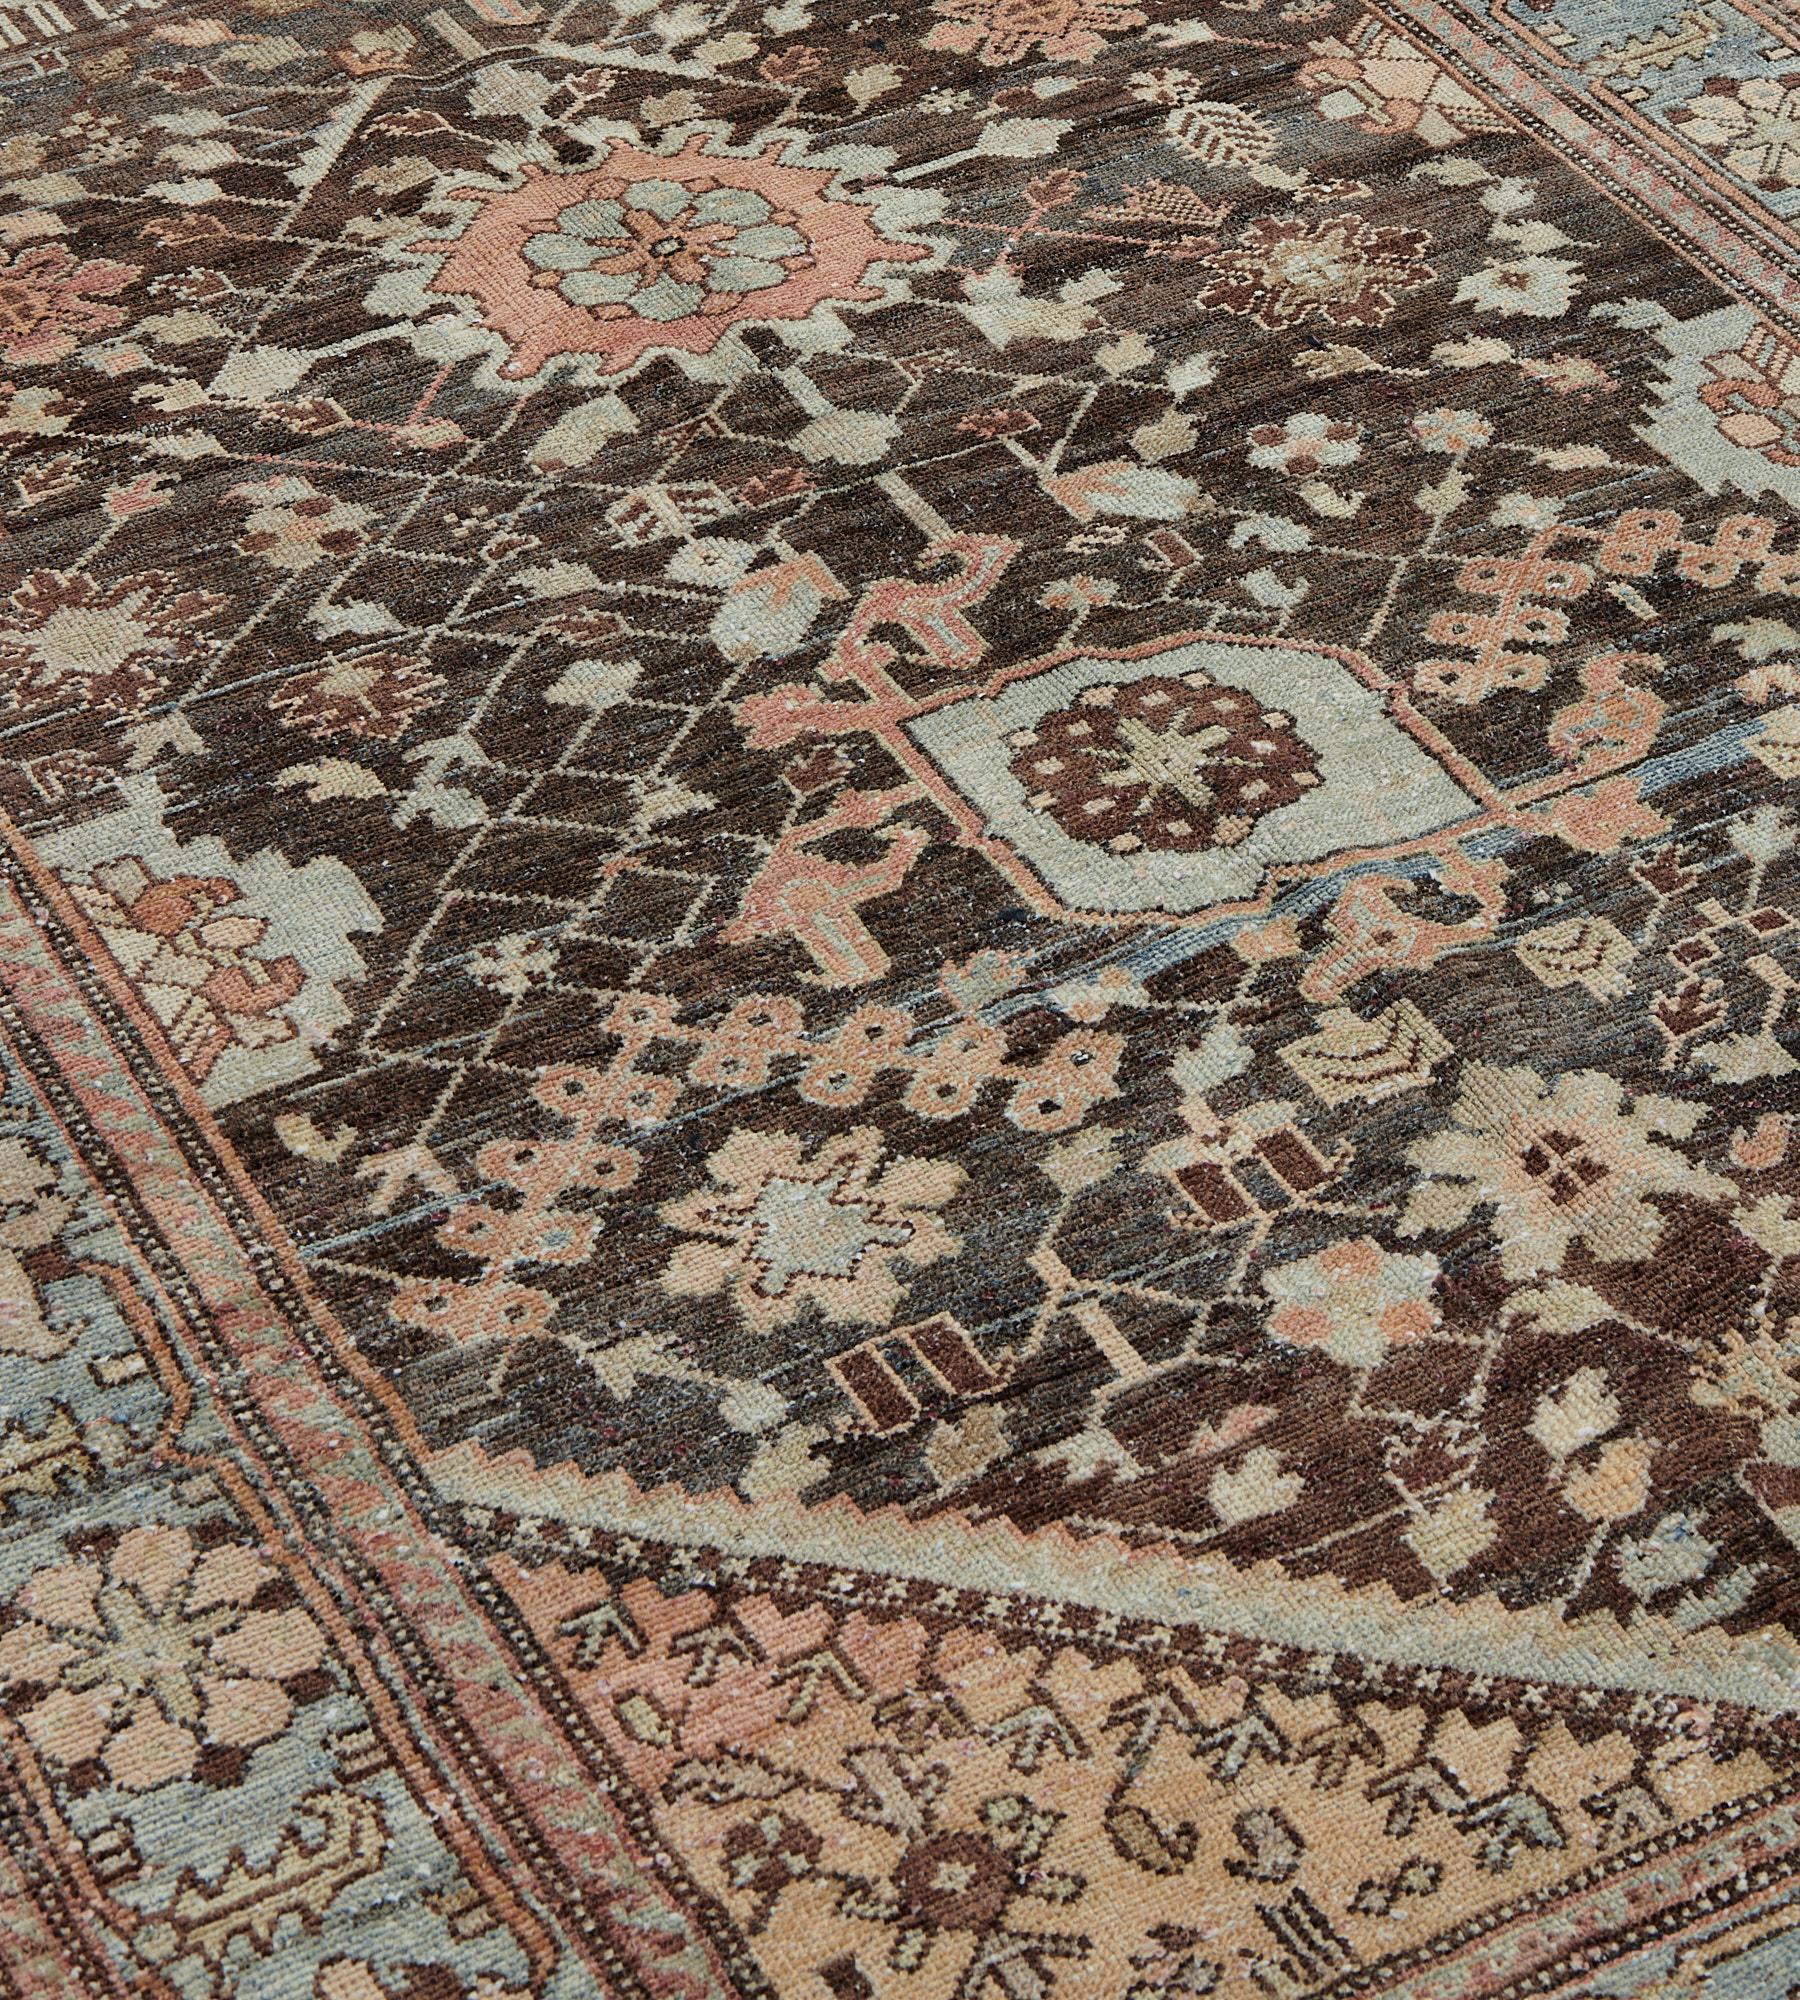 This antique Bakhtiari runner has a charcoal-brown field with central column of light blue and terracotta-red palmettes linked by a dense profusion of angular palmette and floral vine, part similar palmettes at each side, soft terracotta-pink